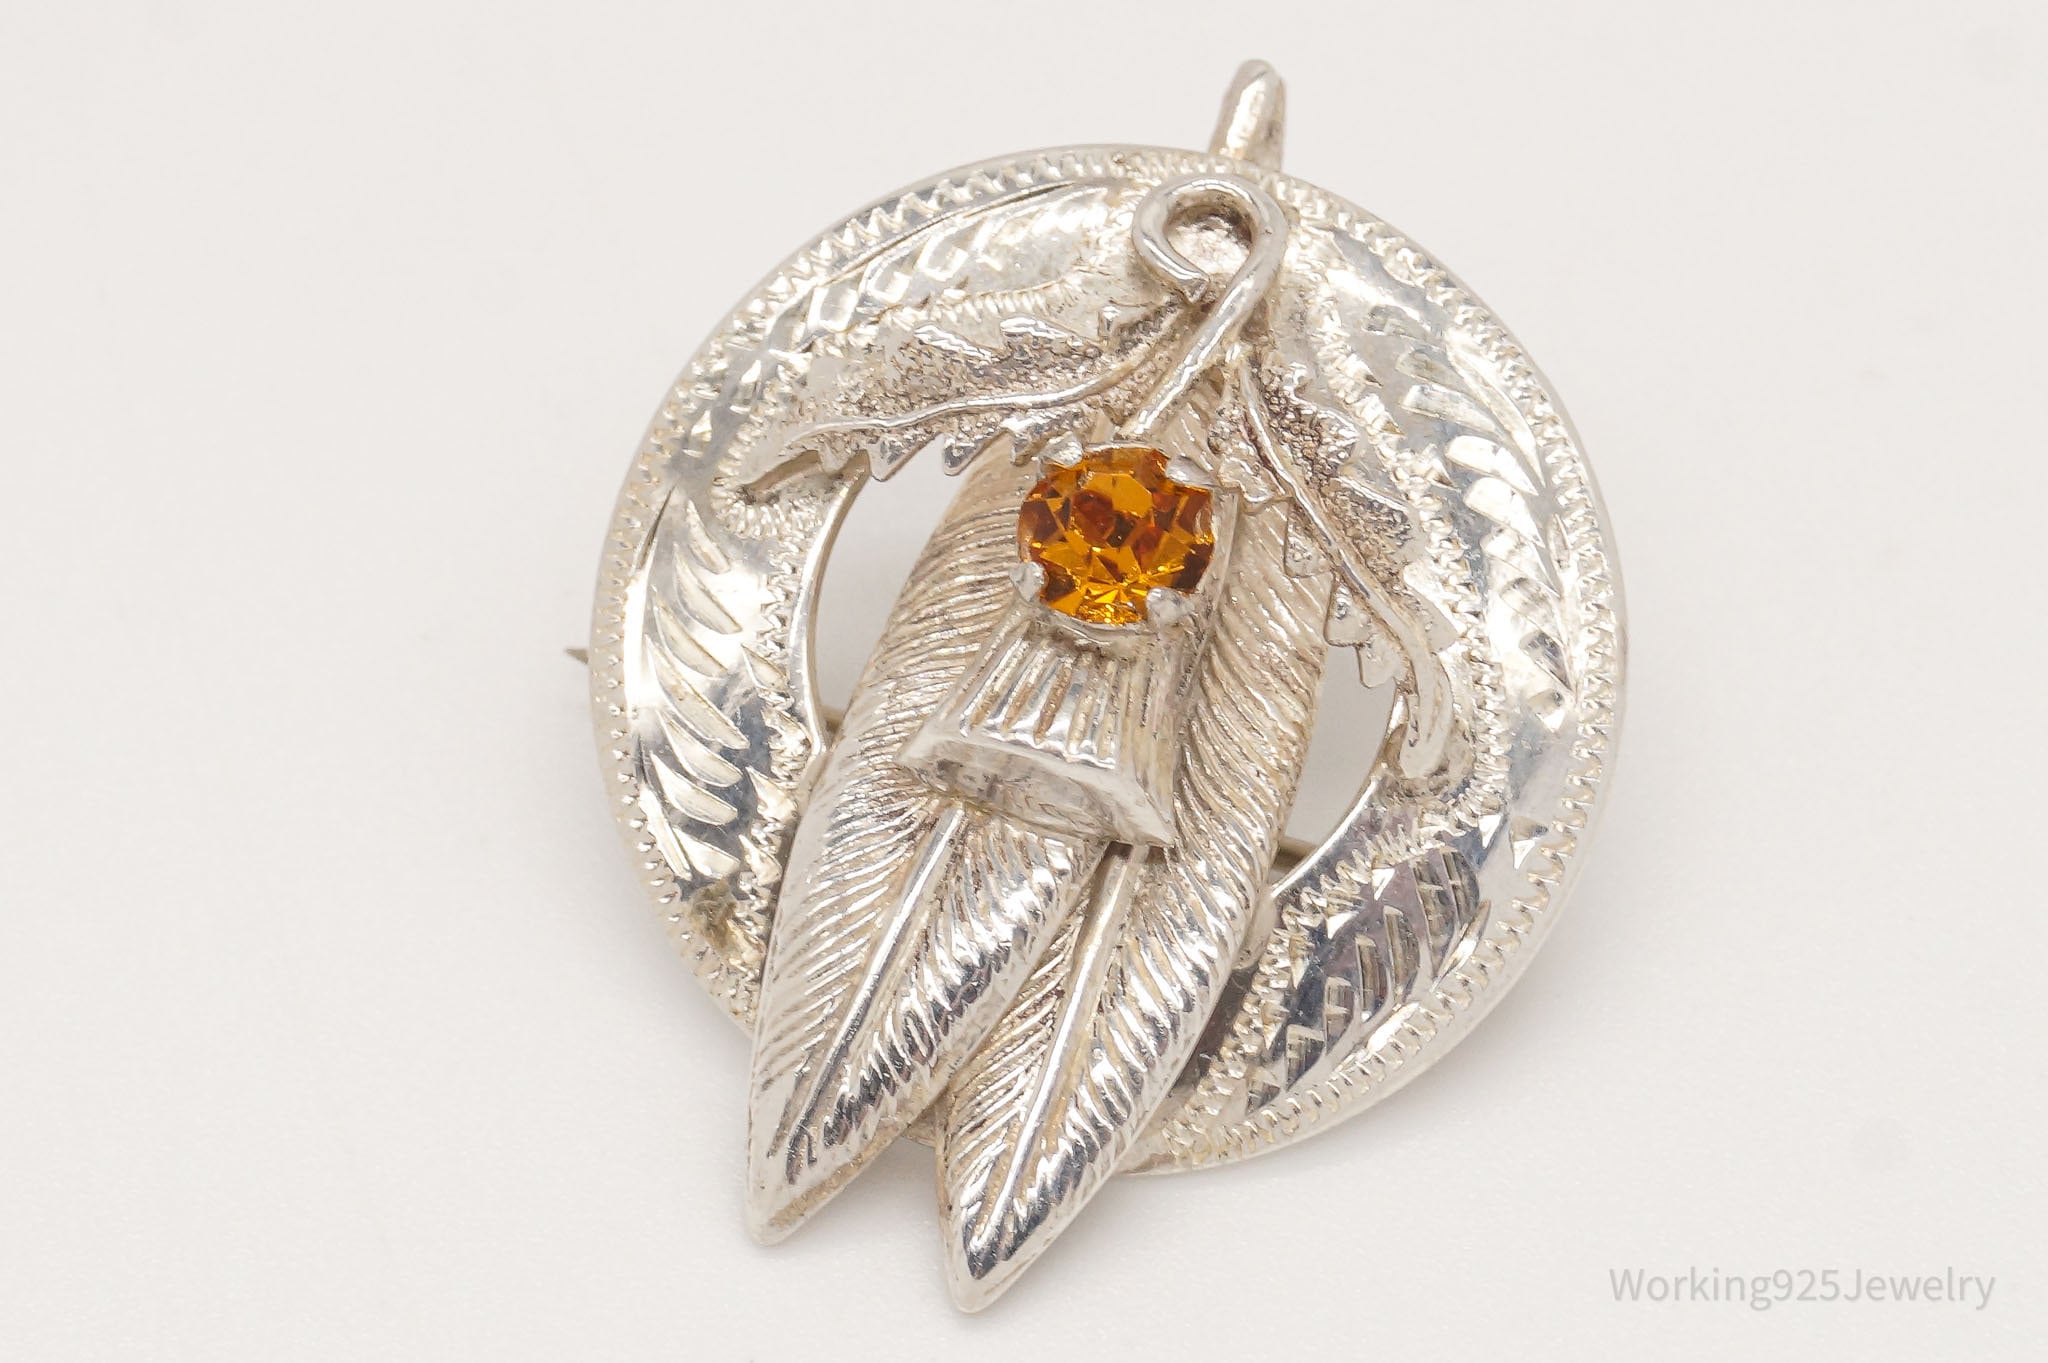 Vintage WB Ward Brothers Citrine Scottish Thistle Sterling Silver Brooch